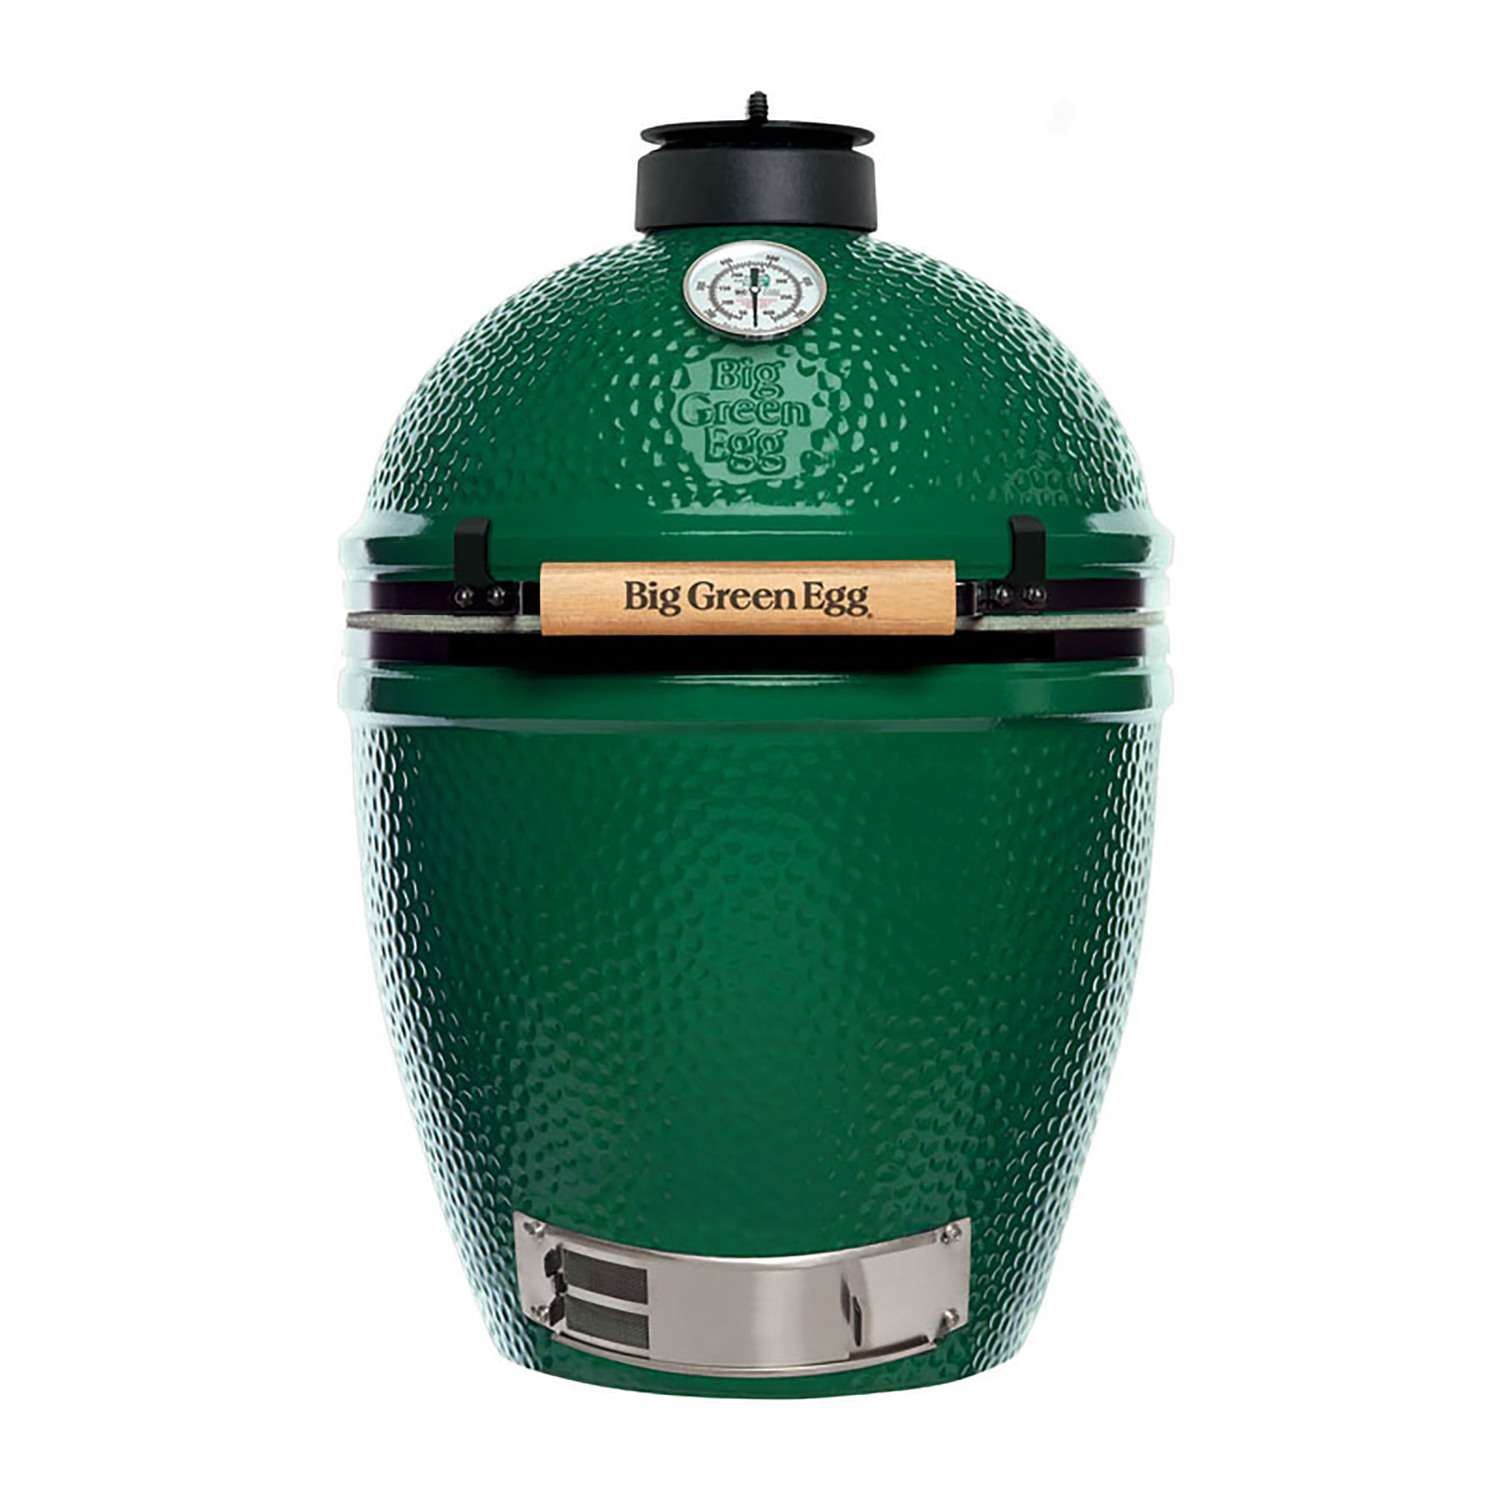 Big Green Egg in. Large Charcoal Grill and Smoker Green - Ace Hardware